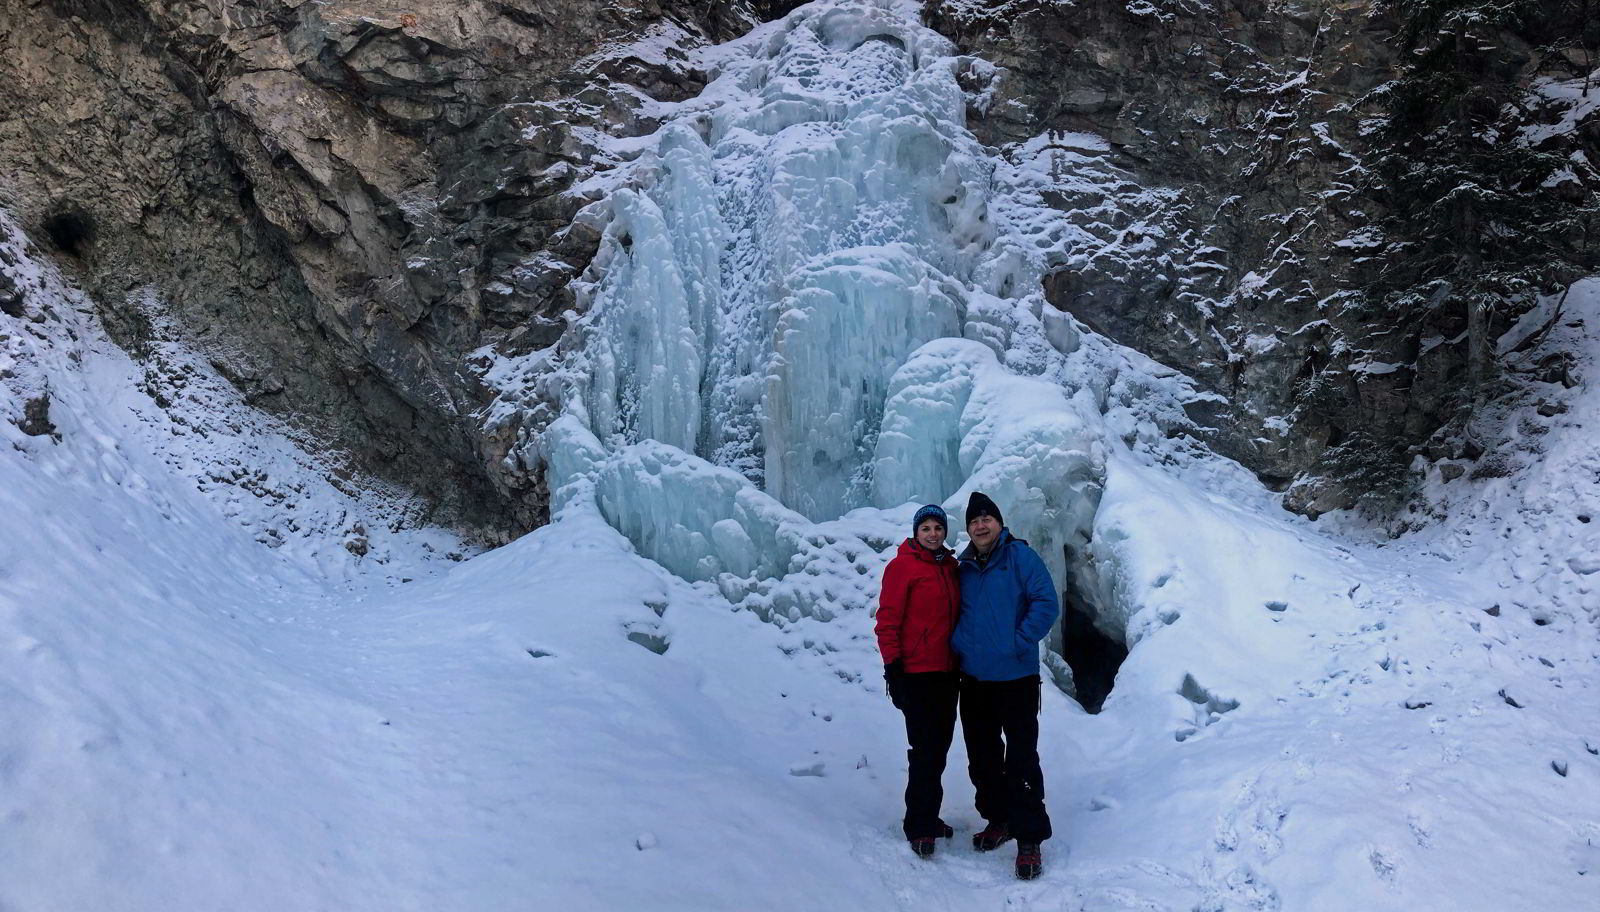 An image of a couple standing in front of the frozen Star Creek Falls in Crowsnest Pass, Alberta, Canada.